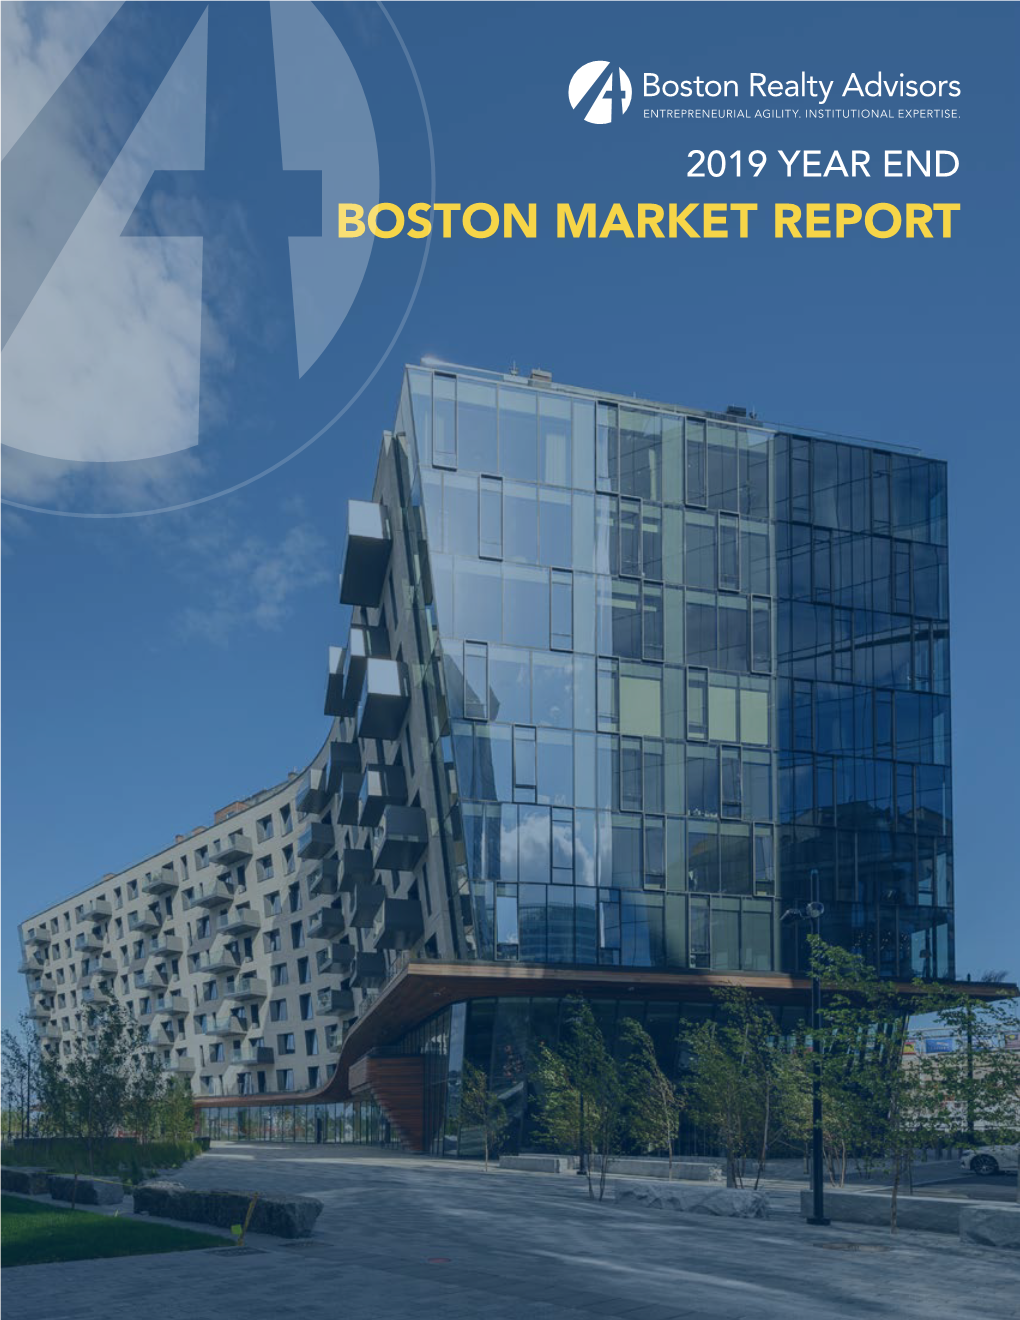 Boston Market Report Table of Contents